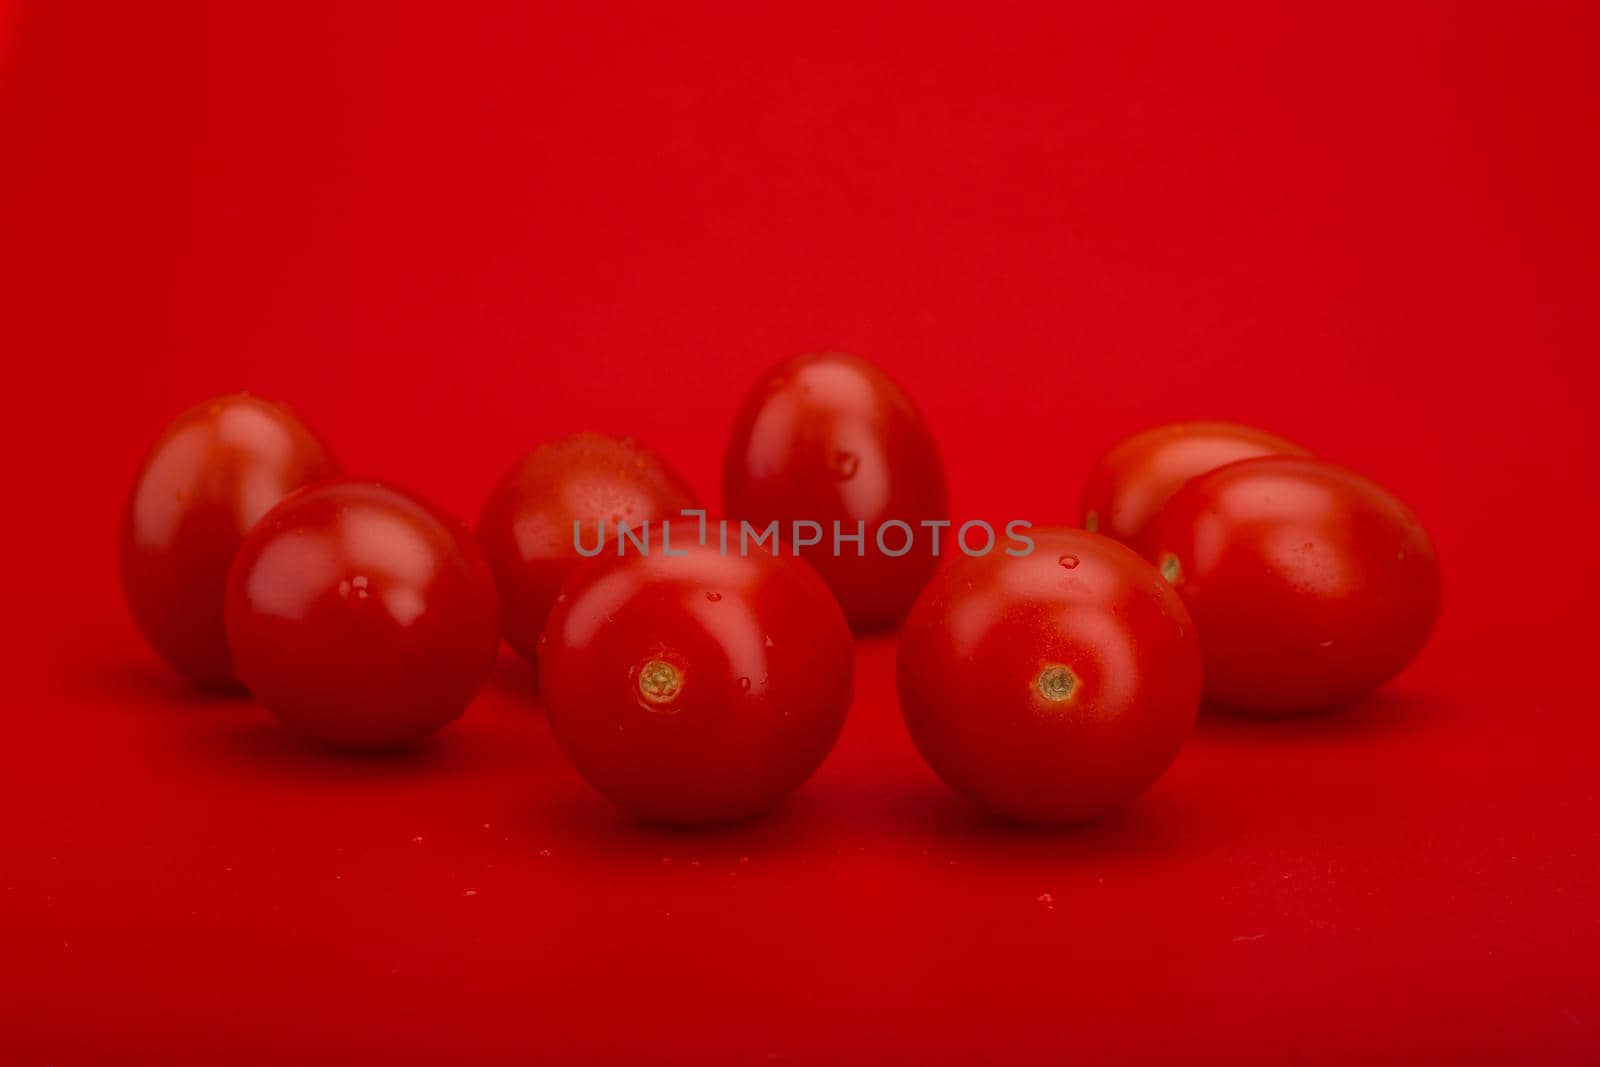 Bunch of wet tomatoes with drops of water on red background. Concept of vegan or healthy lifestyle by Senorina_Irina